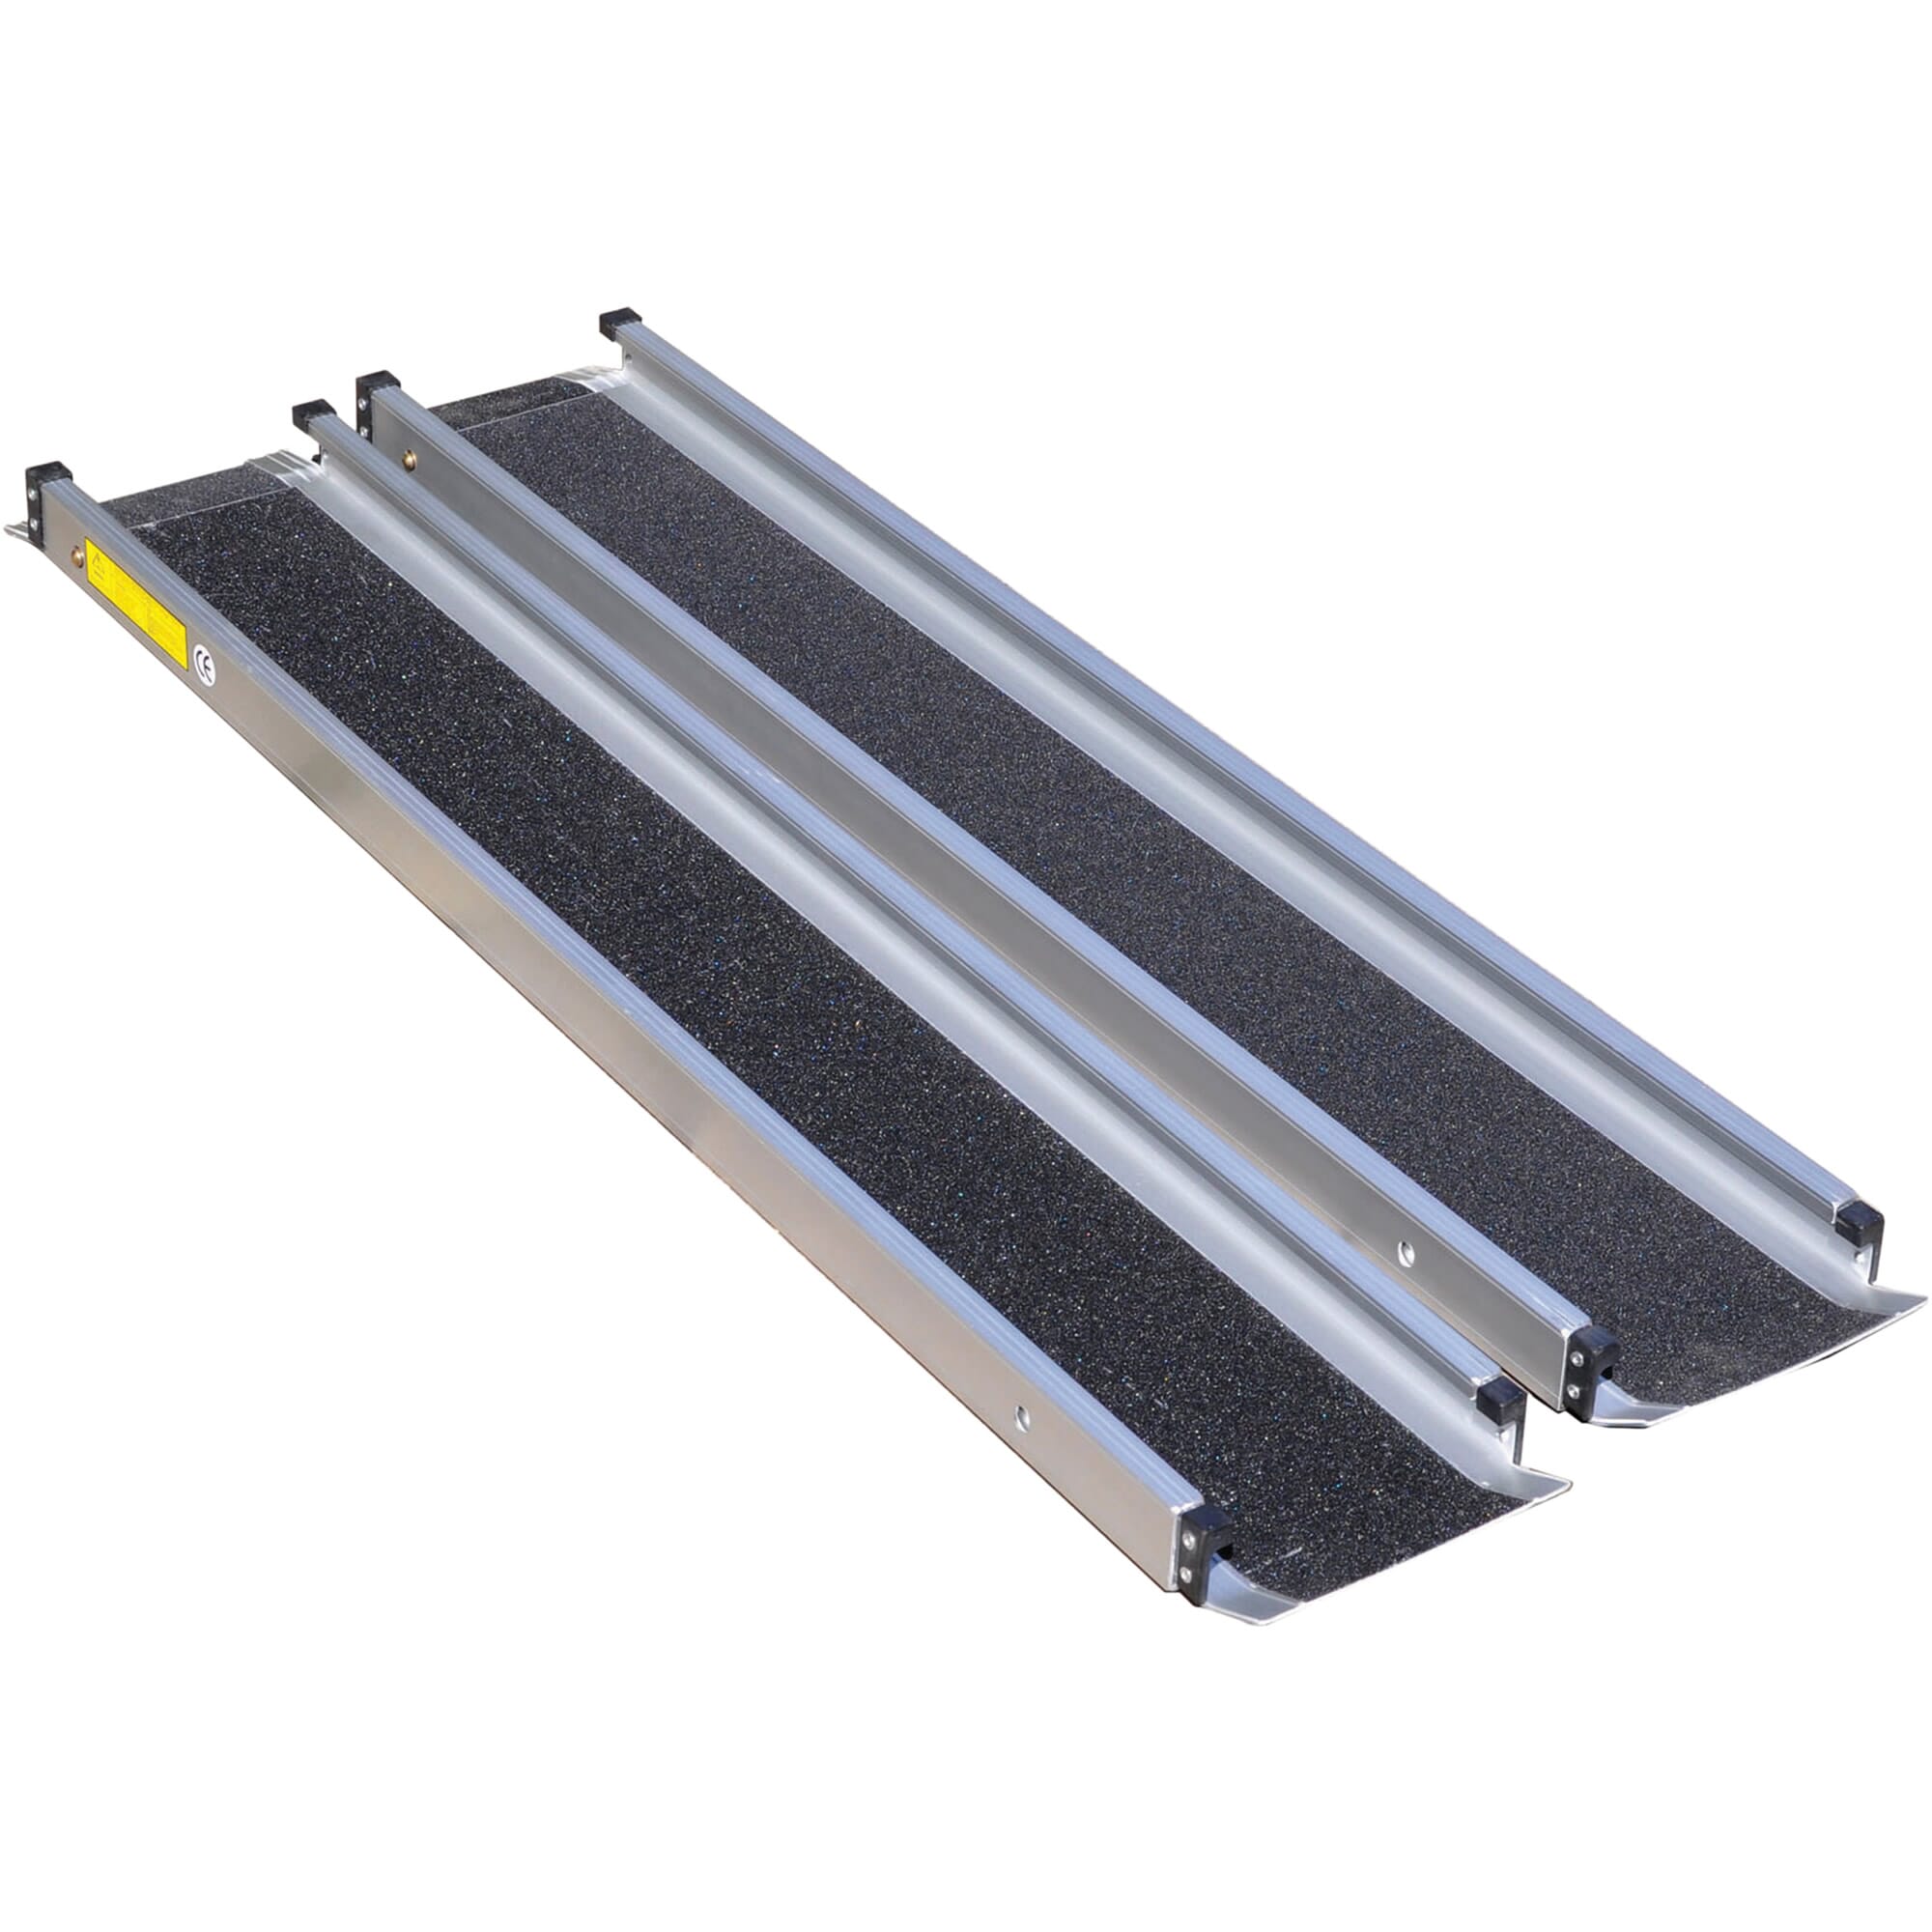 View Telescopic NonSlip Channel Ramps 5ft information